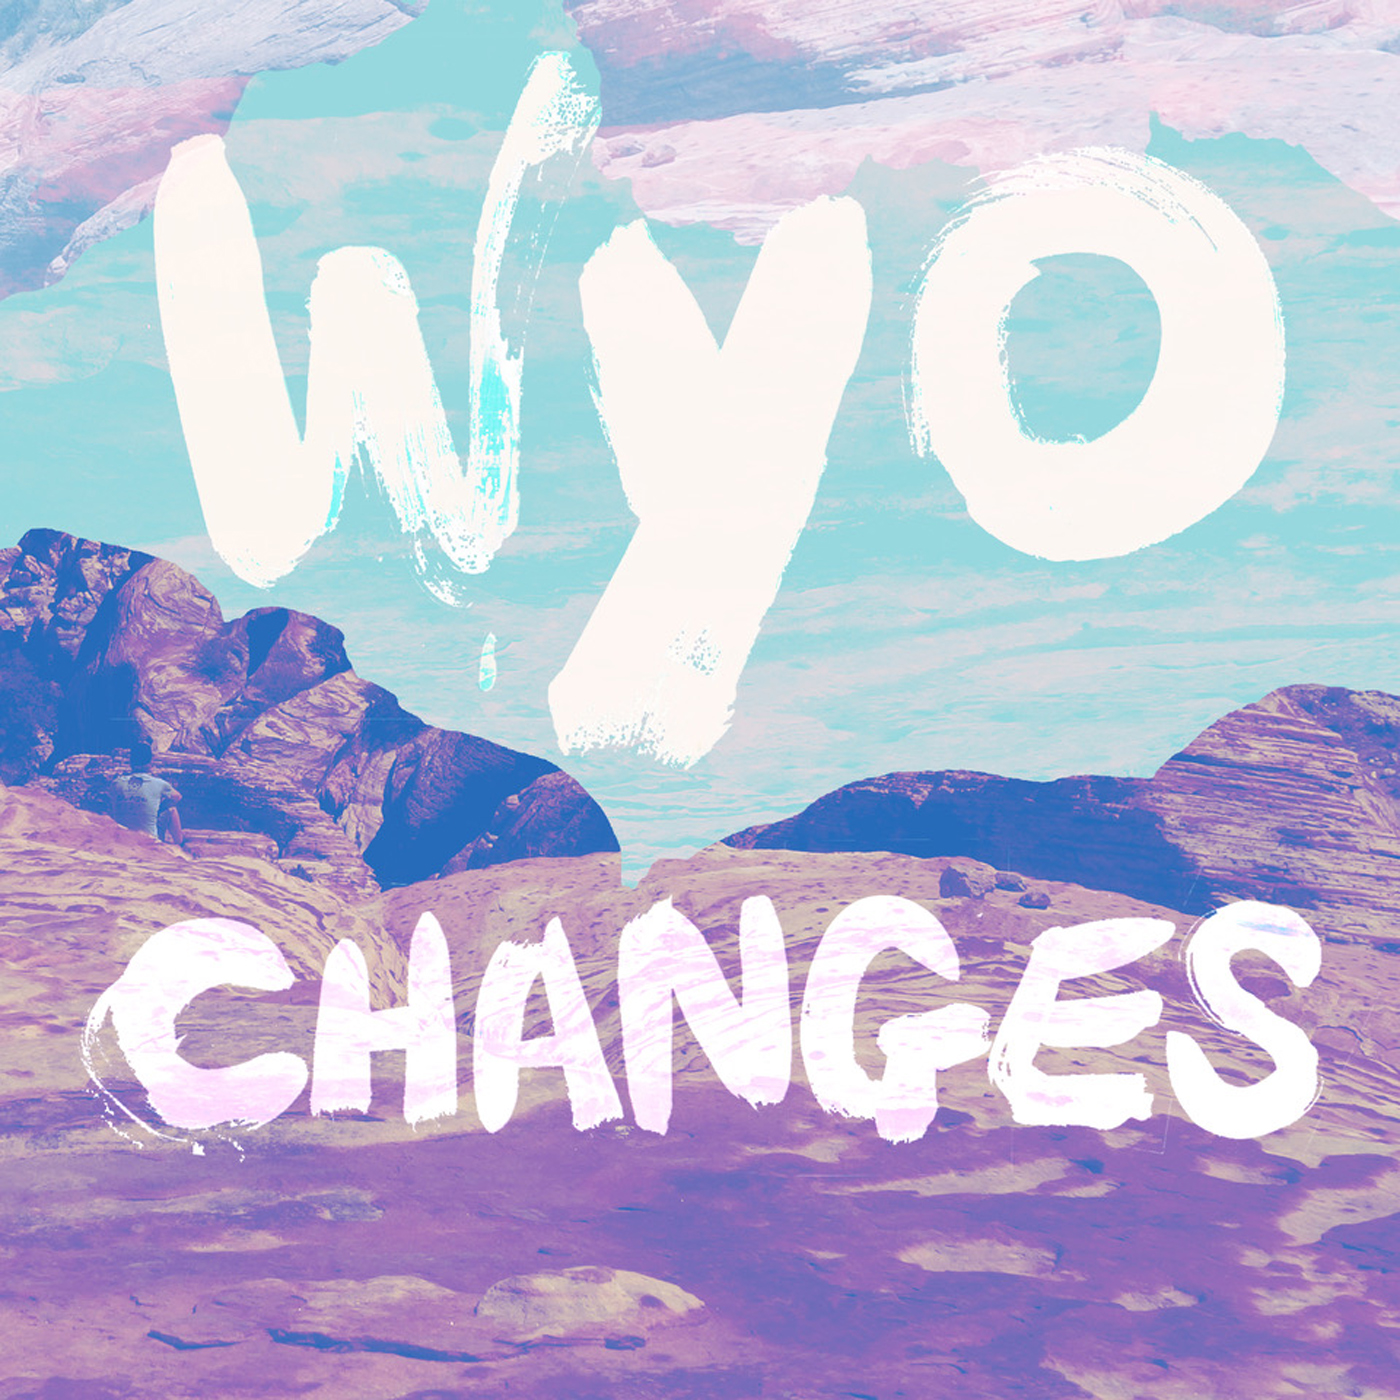 EXCLUSIVE ALBUM PREMIERE: “Changes” by WYO